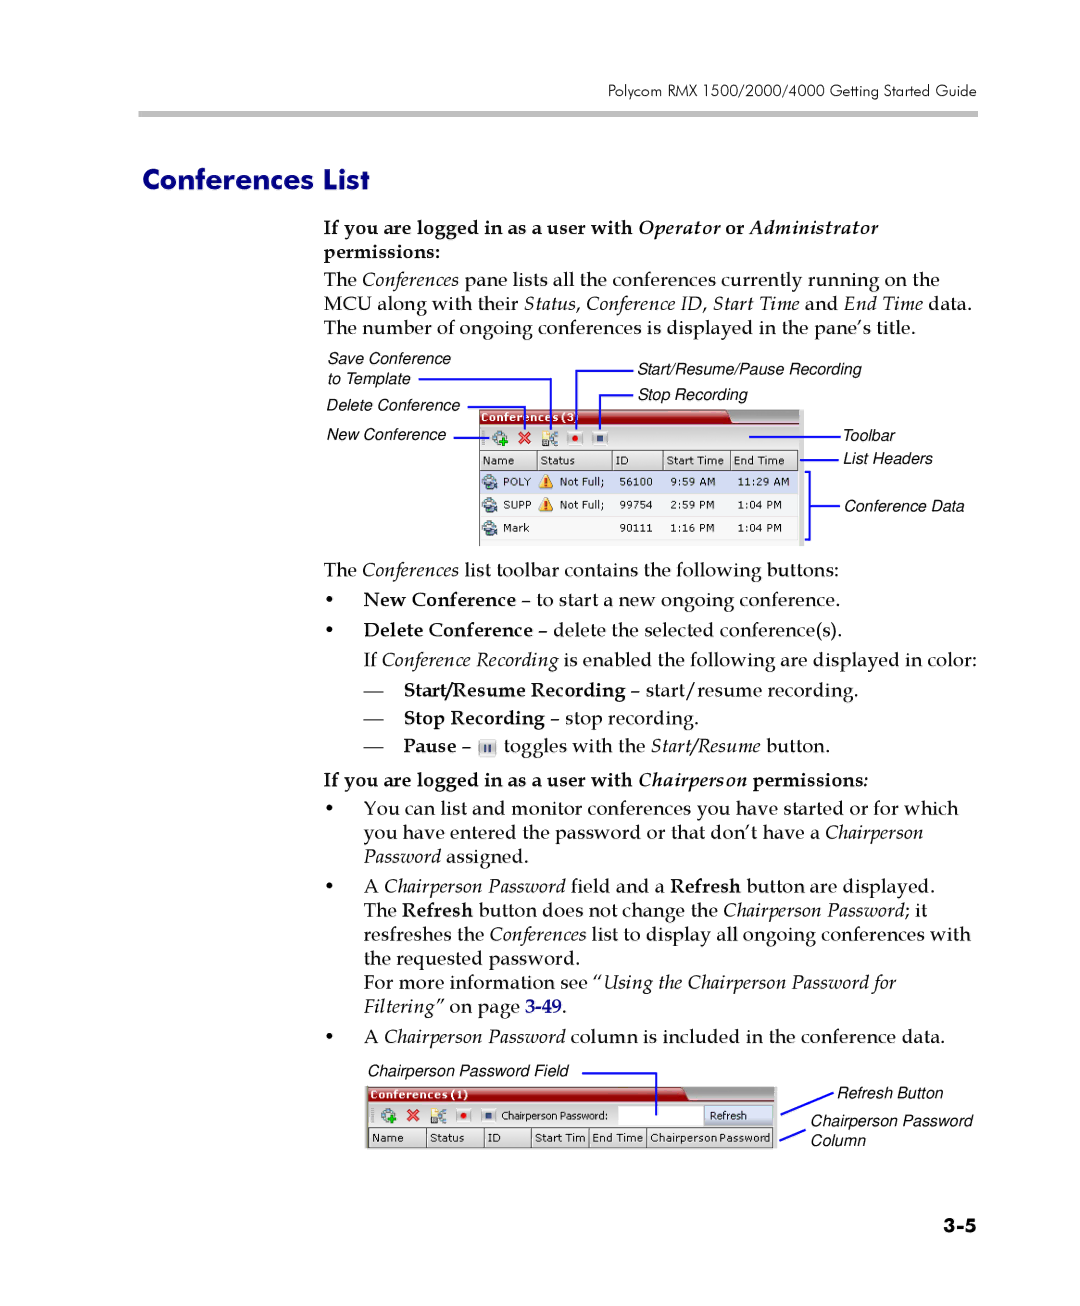 Polycom DOC2560C manual Conferences List, If you are logged in as a user with Chairperson permissions 